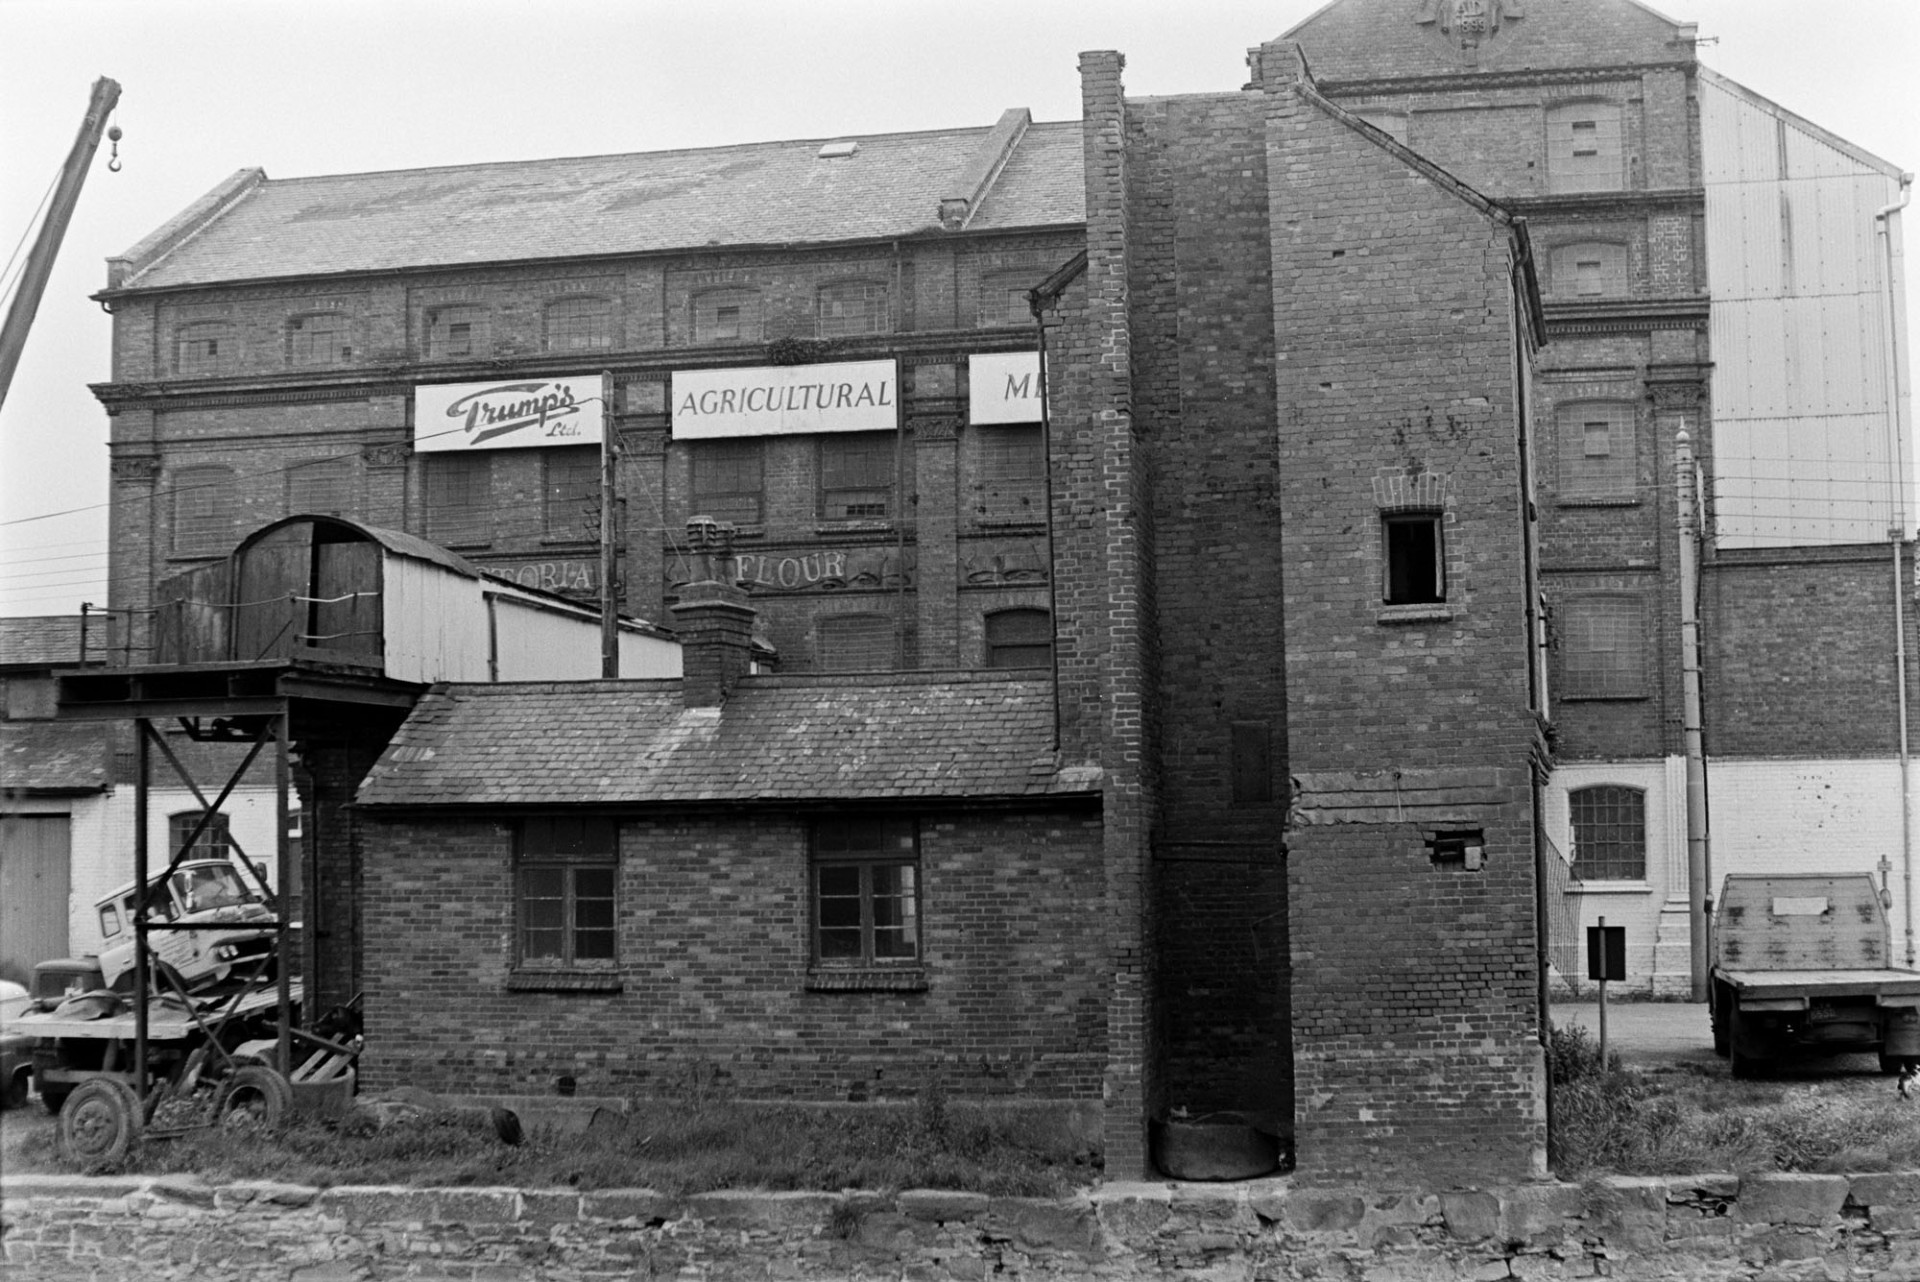 The premises of 'Trumps Agriculture Merchants' near the River Taw at Barnstaple. The building is a brick warehouse or mill.